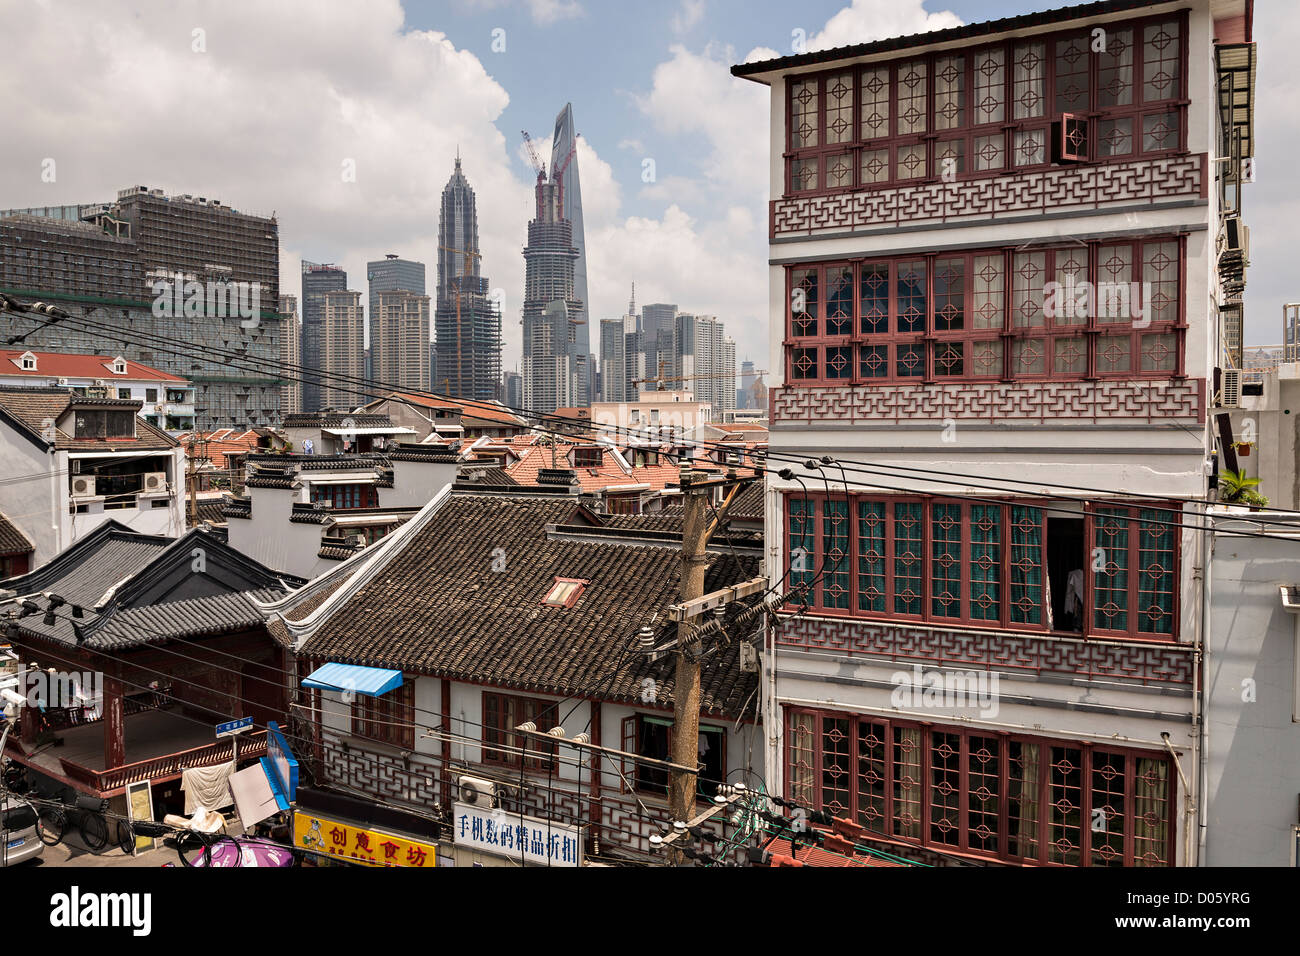 Traditional chinese tile roofs contrast the modern skyline of Shanghai, China Stock Photo